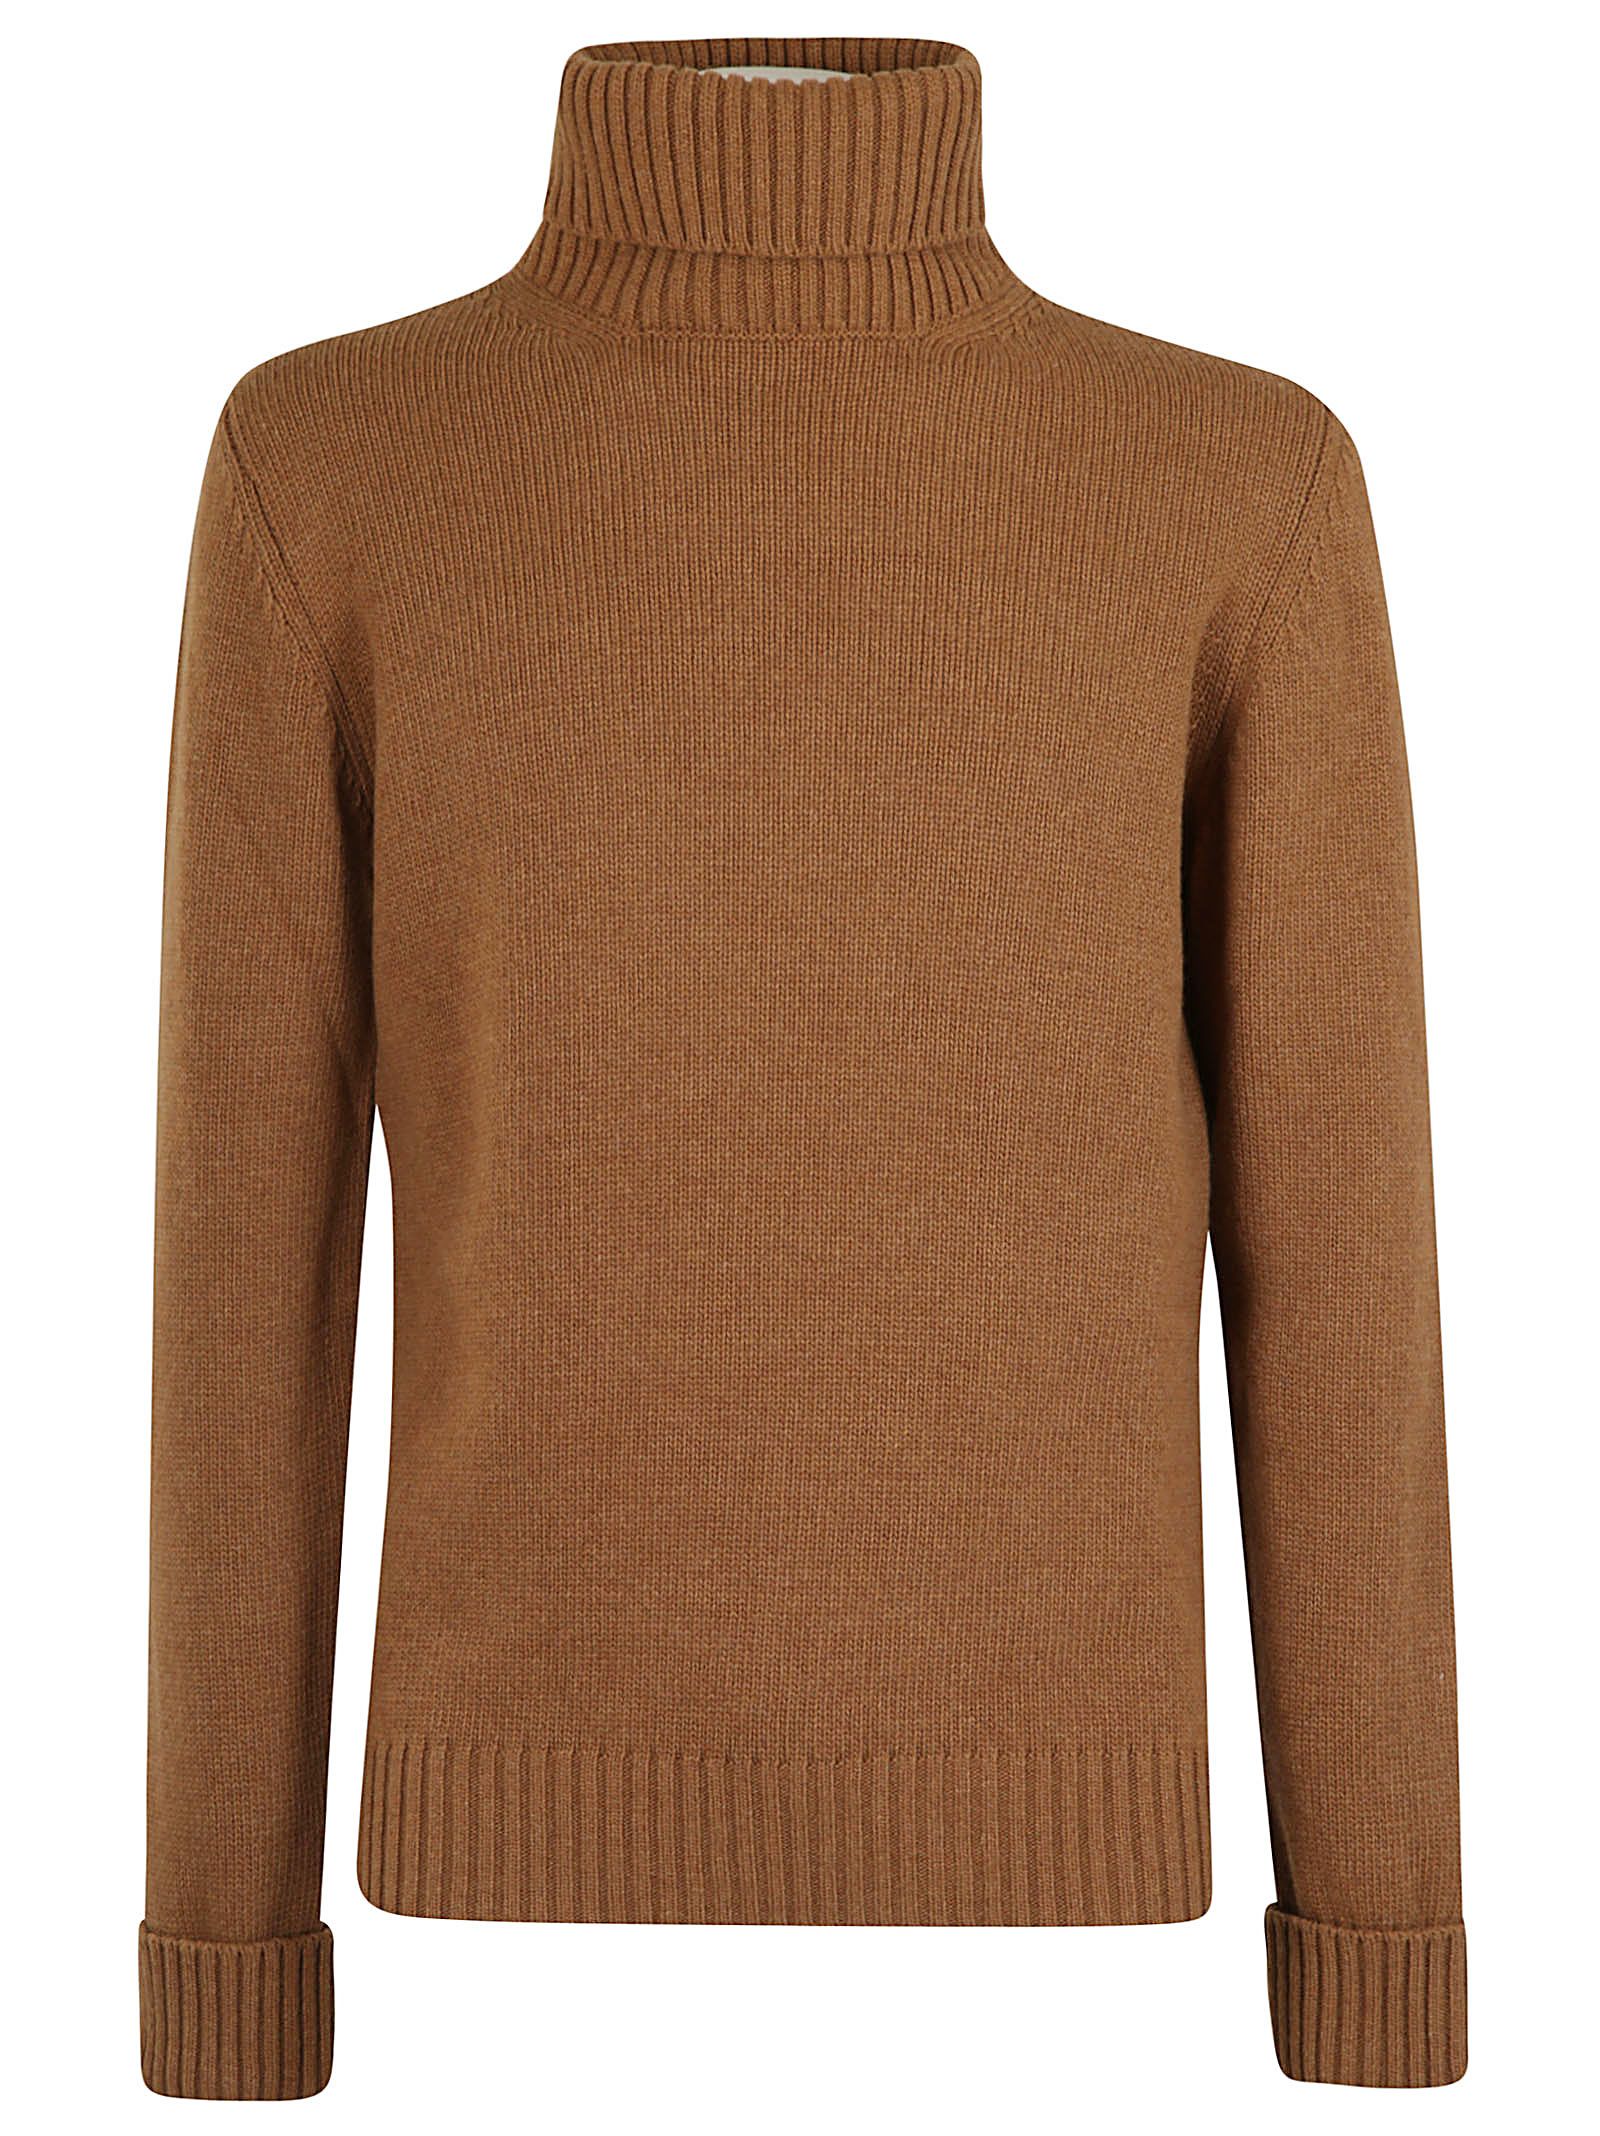 italist | Best price in the market for Fortela Fortela Classic Sweater ...